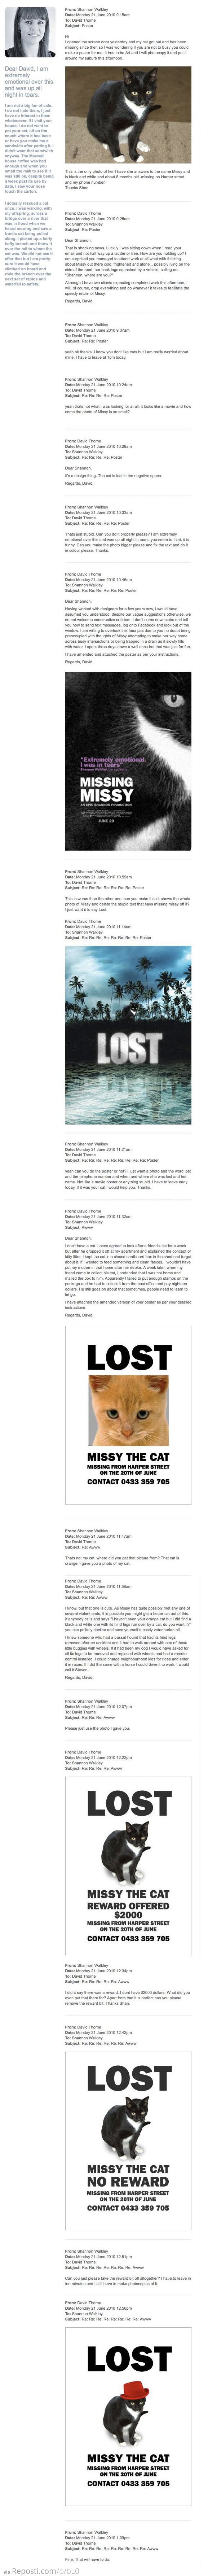 Missy The Missing Cat